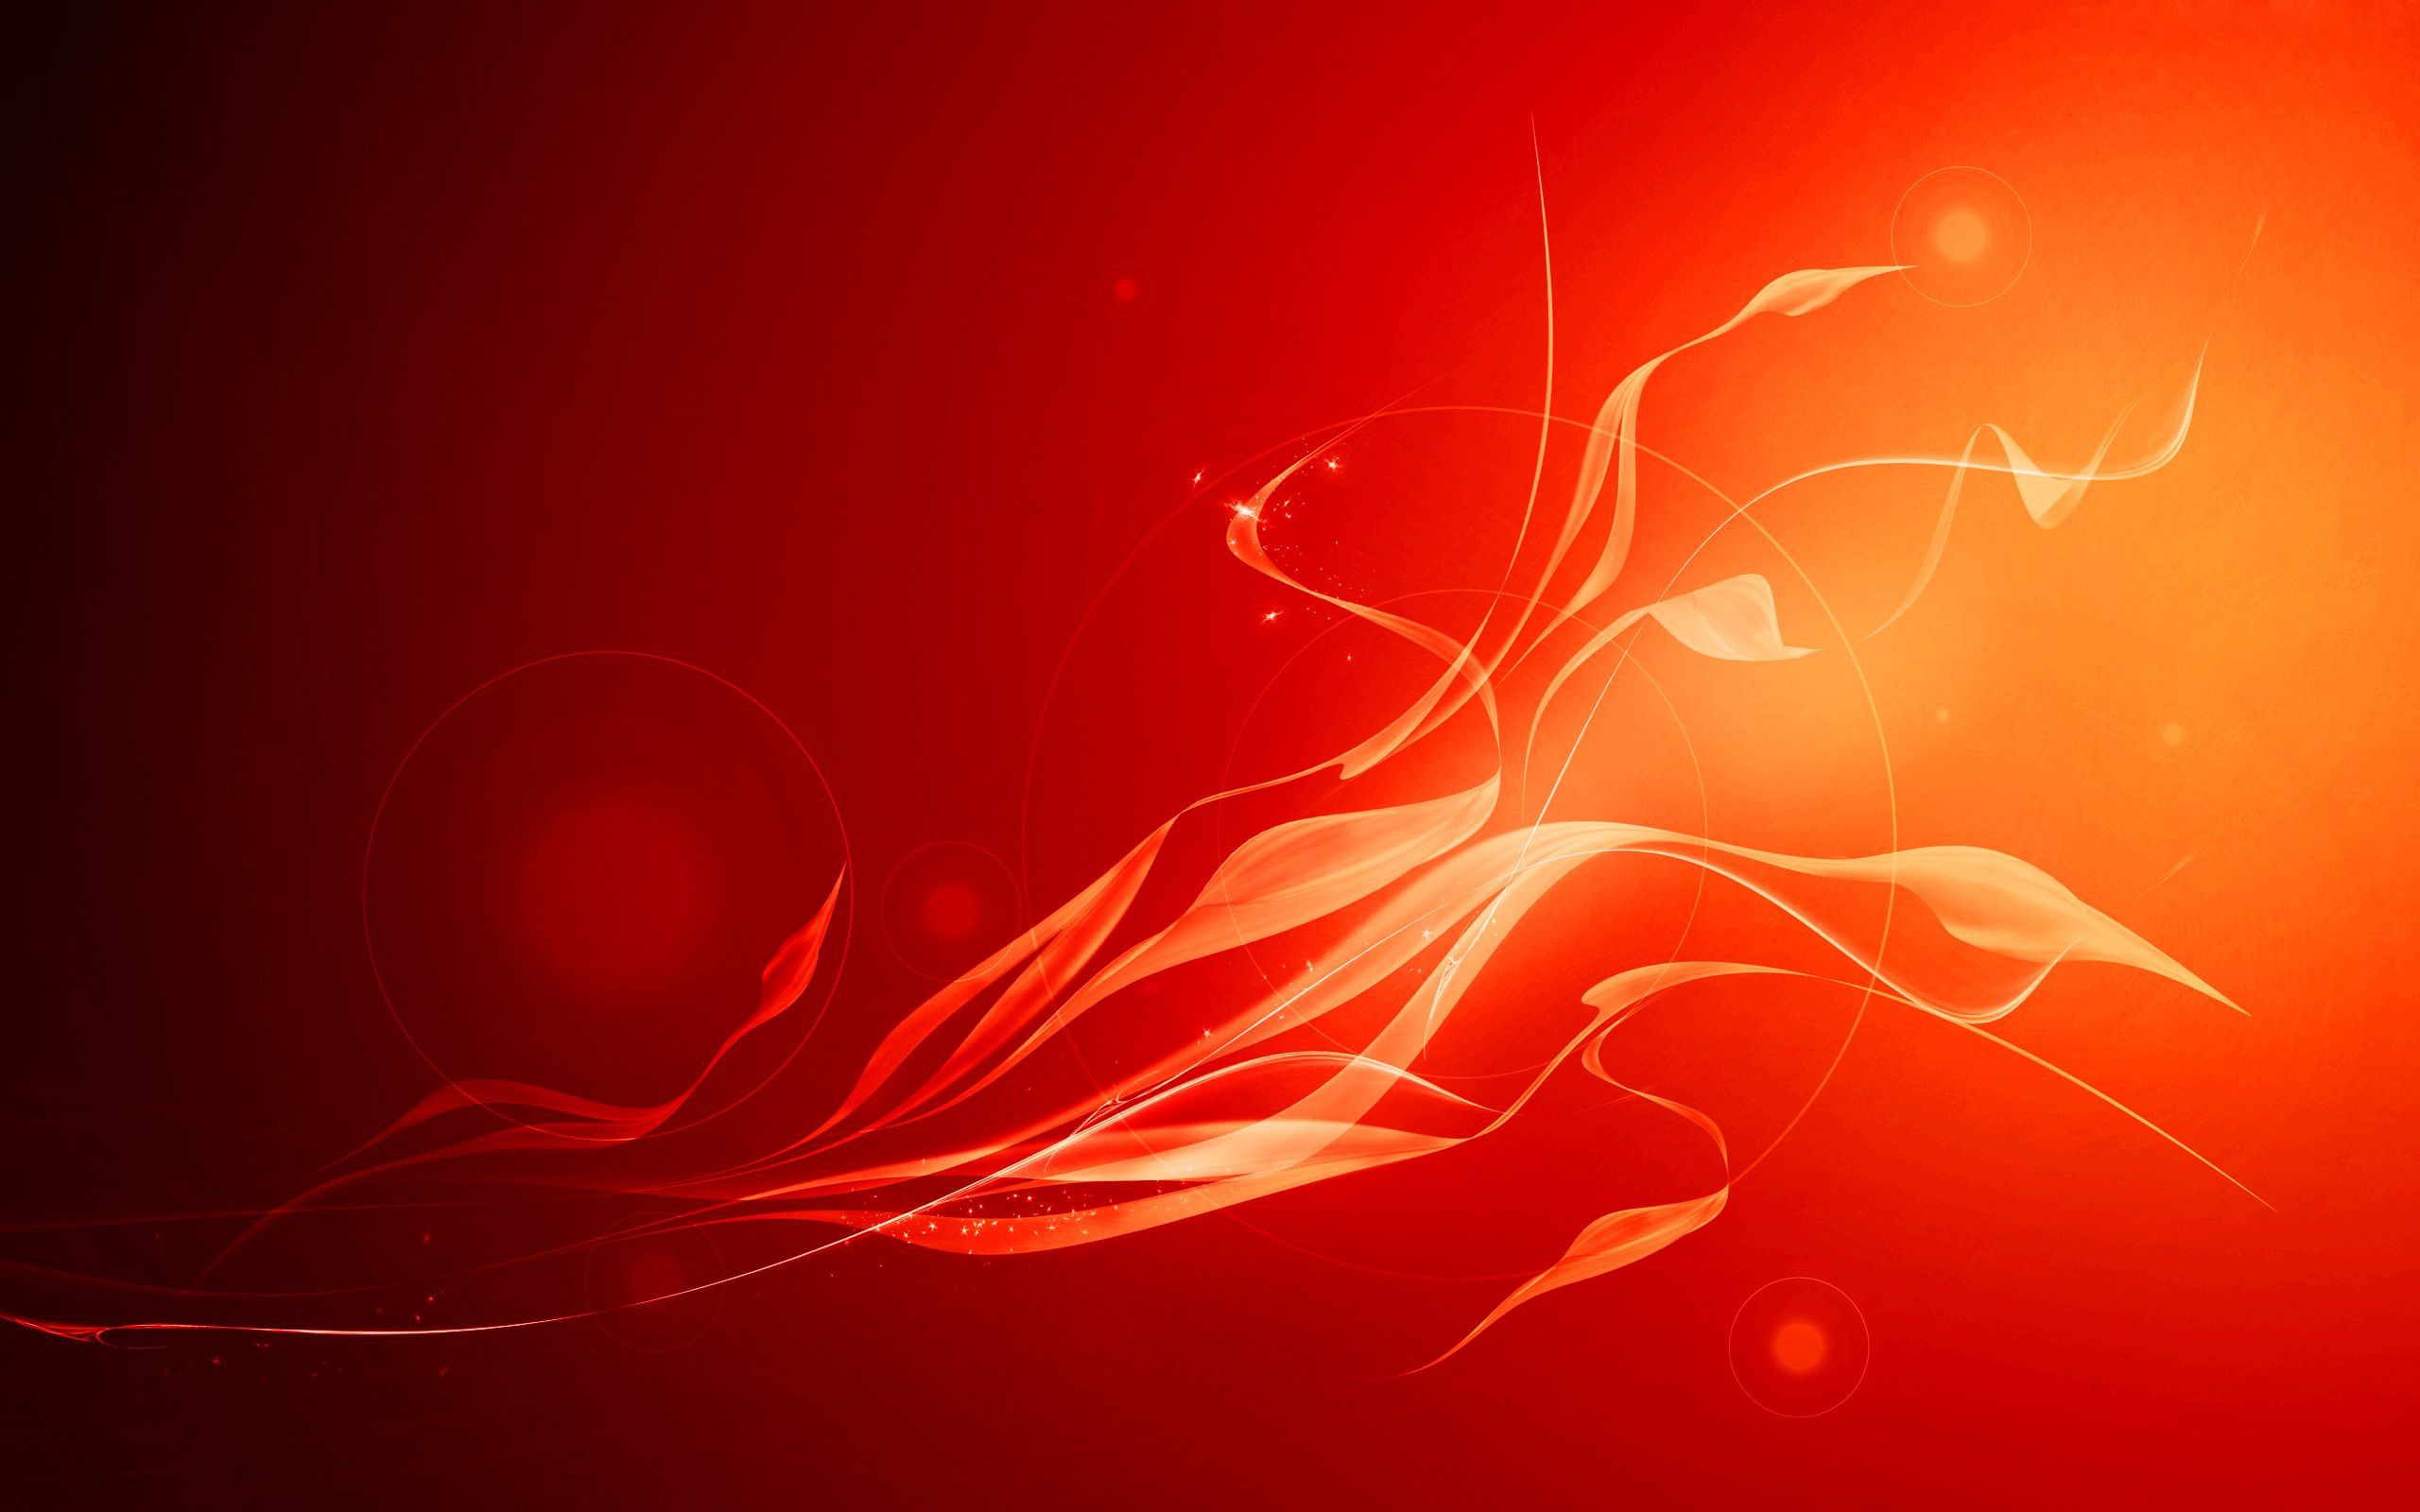 Red wallpaper red texture background red background images red wallpaper